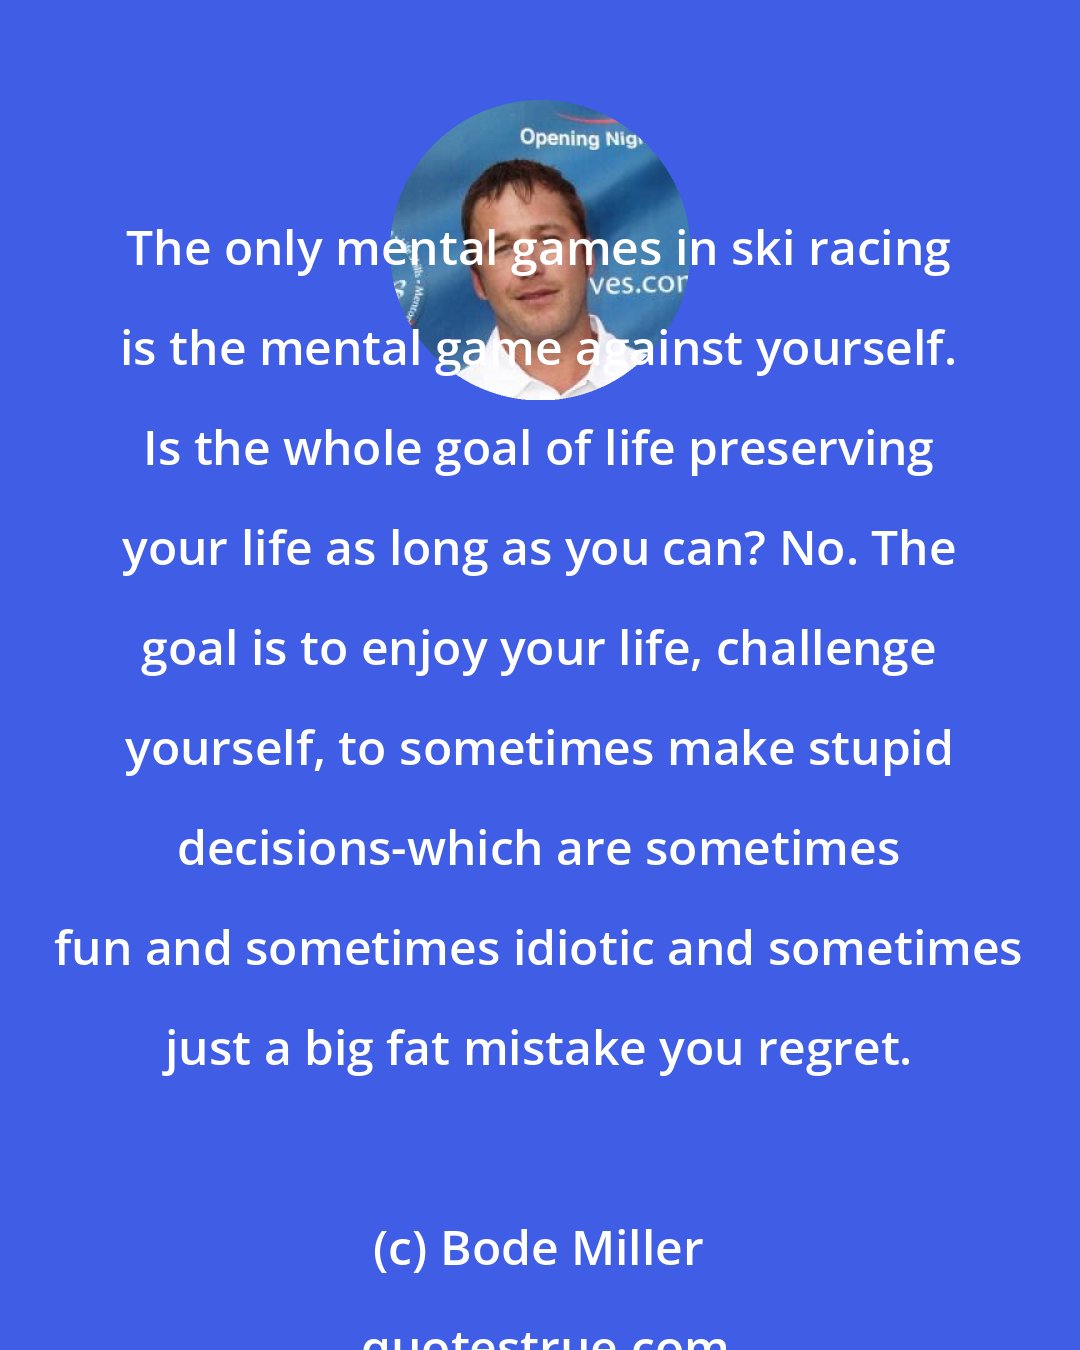 Bode Miller: The only mental games in ski racing is the mental game against yourself. Is the whole goal of life preserving your life as long as you can? No. The goal is to enjoy your life, challenge yourself, to sometimes make stupid decisions-which are sometimes fun and sometimes idiotic and sometimes just a big fat mistake you regret.